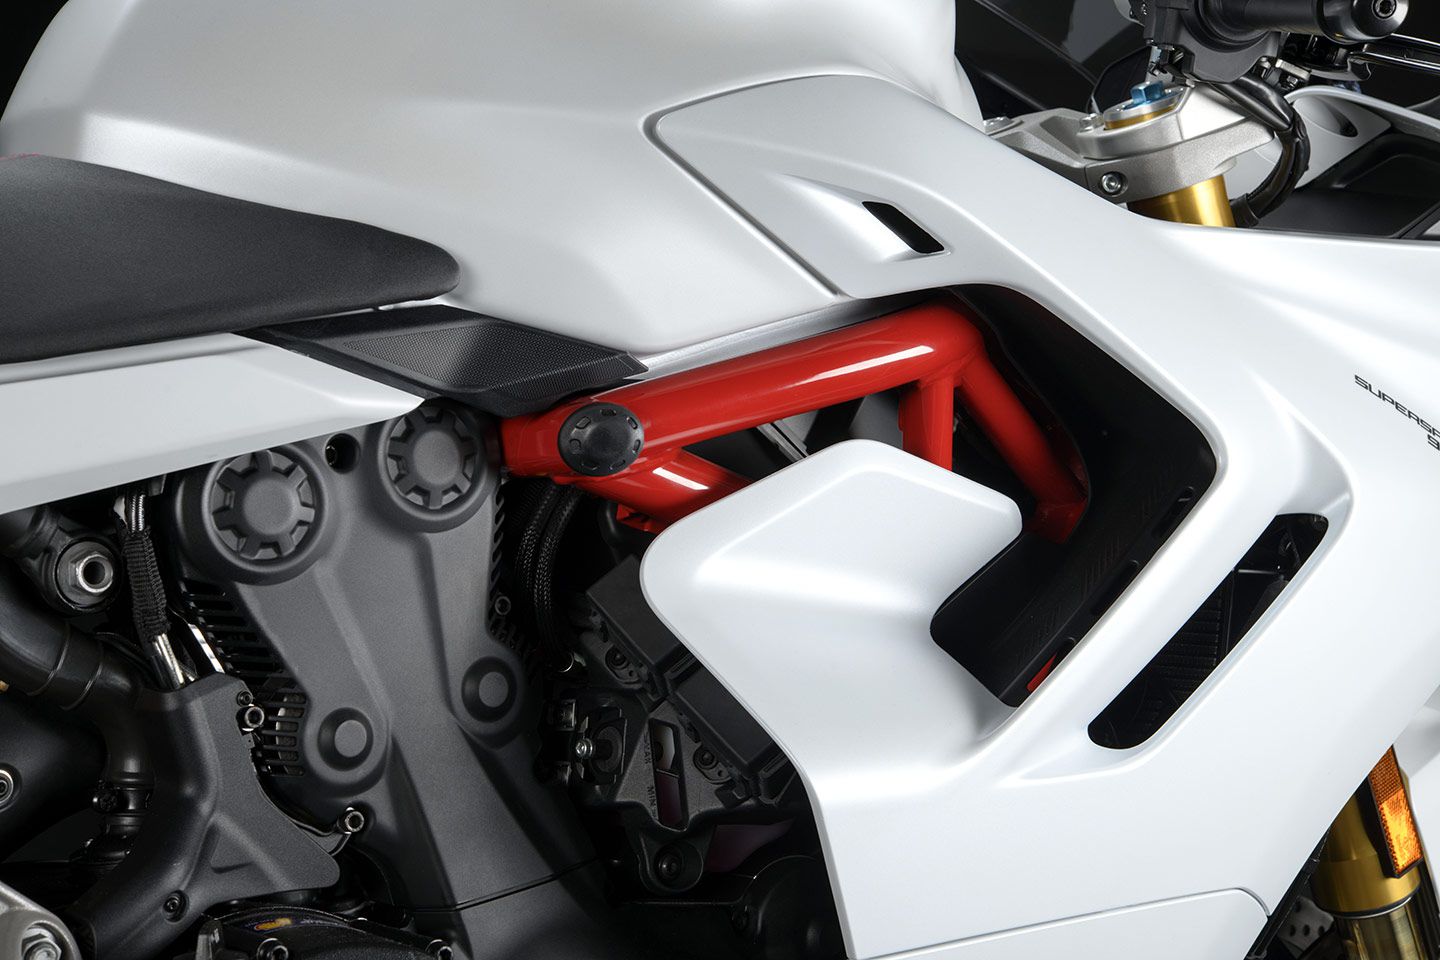 The SuperSport 950 is one of five models to use Ducati’s latest Testastretta 11º V-twin. In SuperSport trim, the engine is claimed to make 110 hp and 68.6 lb.-ft. of torque.